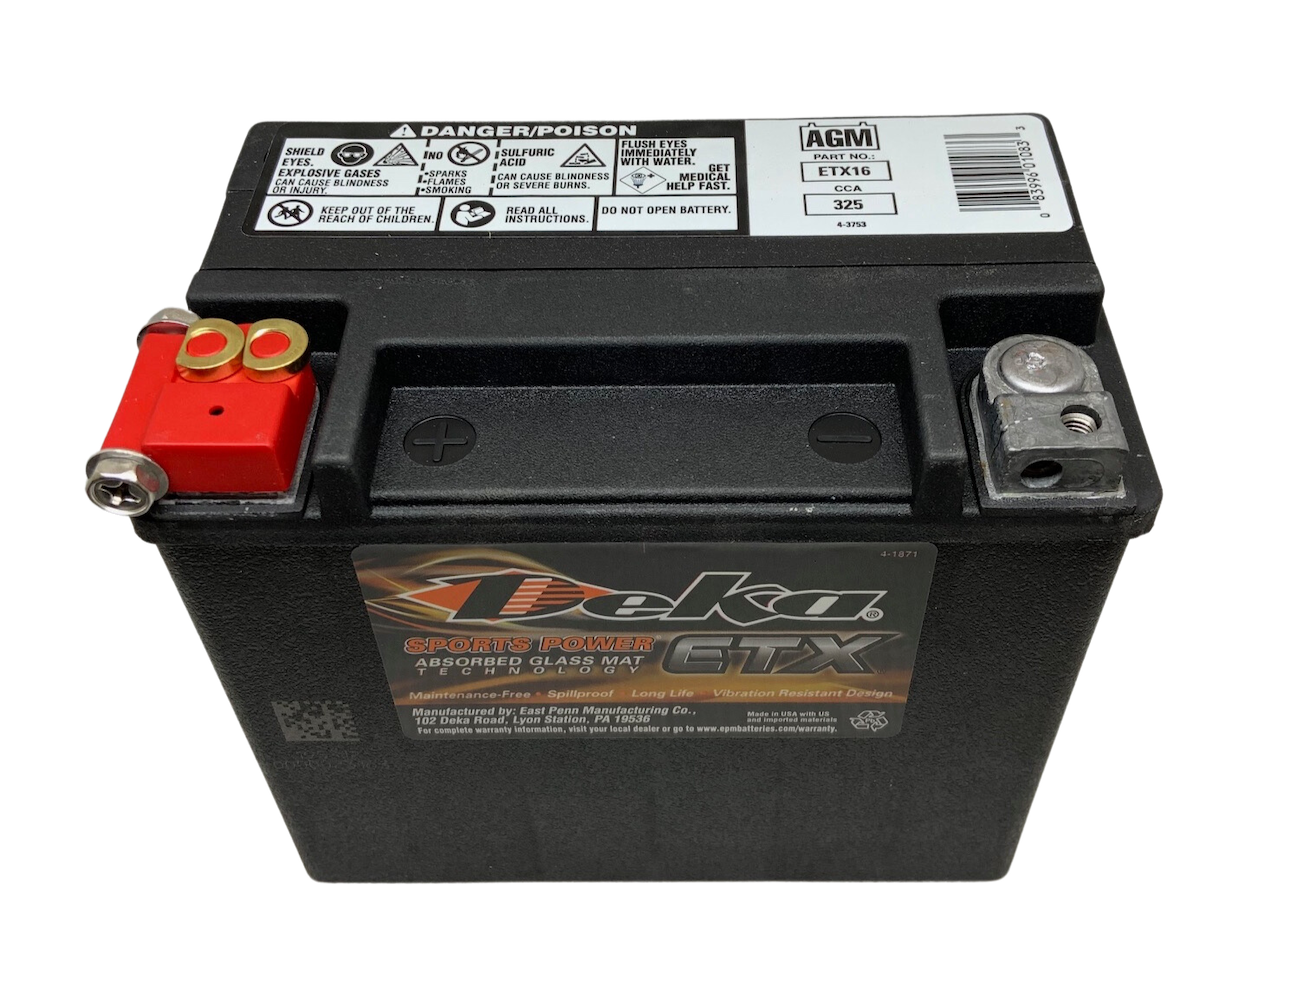 What is the manufacture date of your DEKA ETX 16 battery?